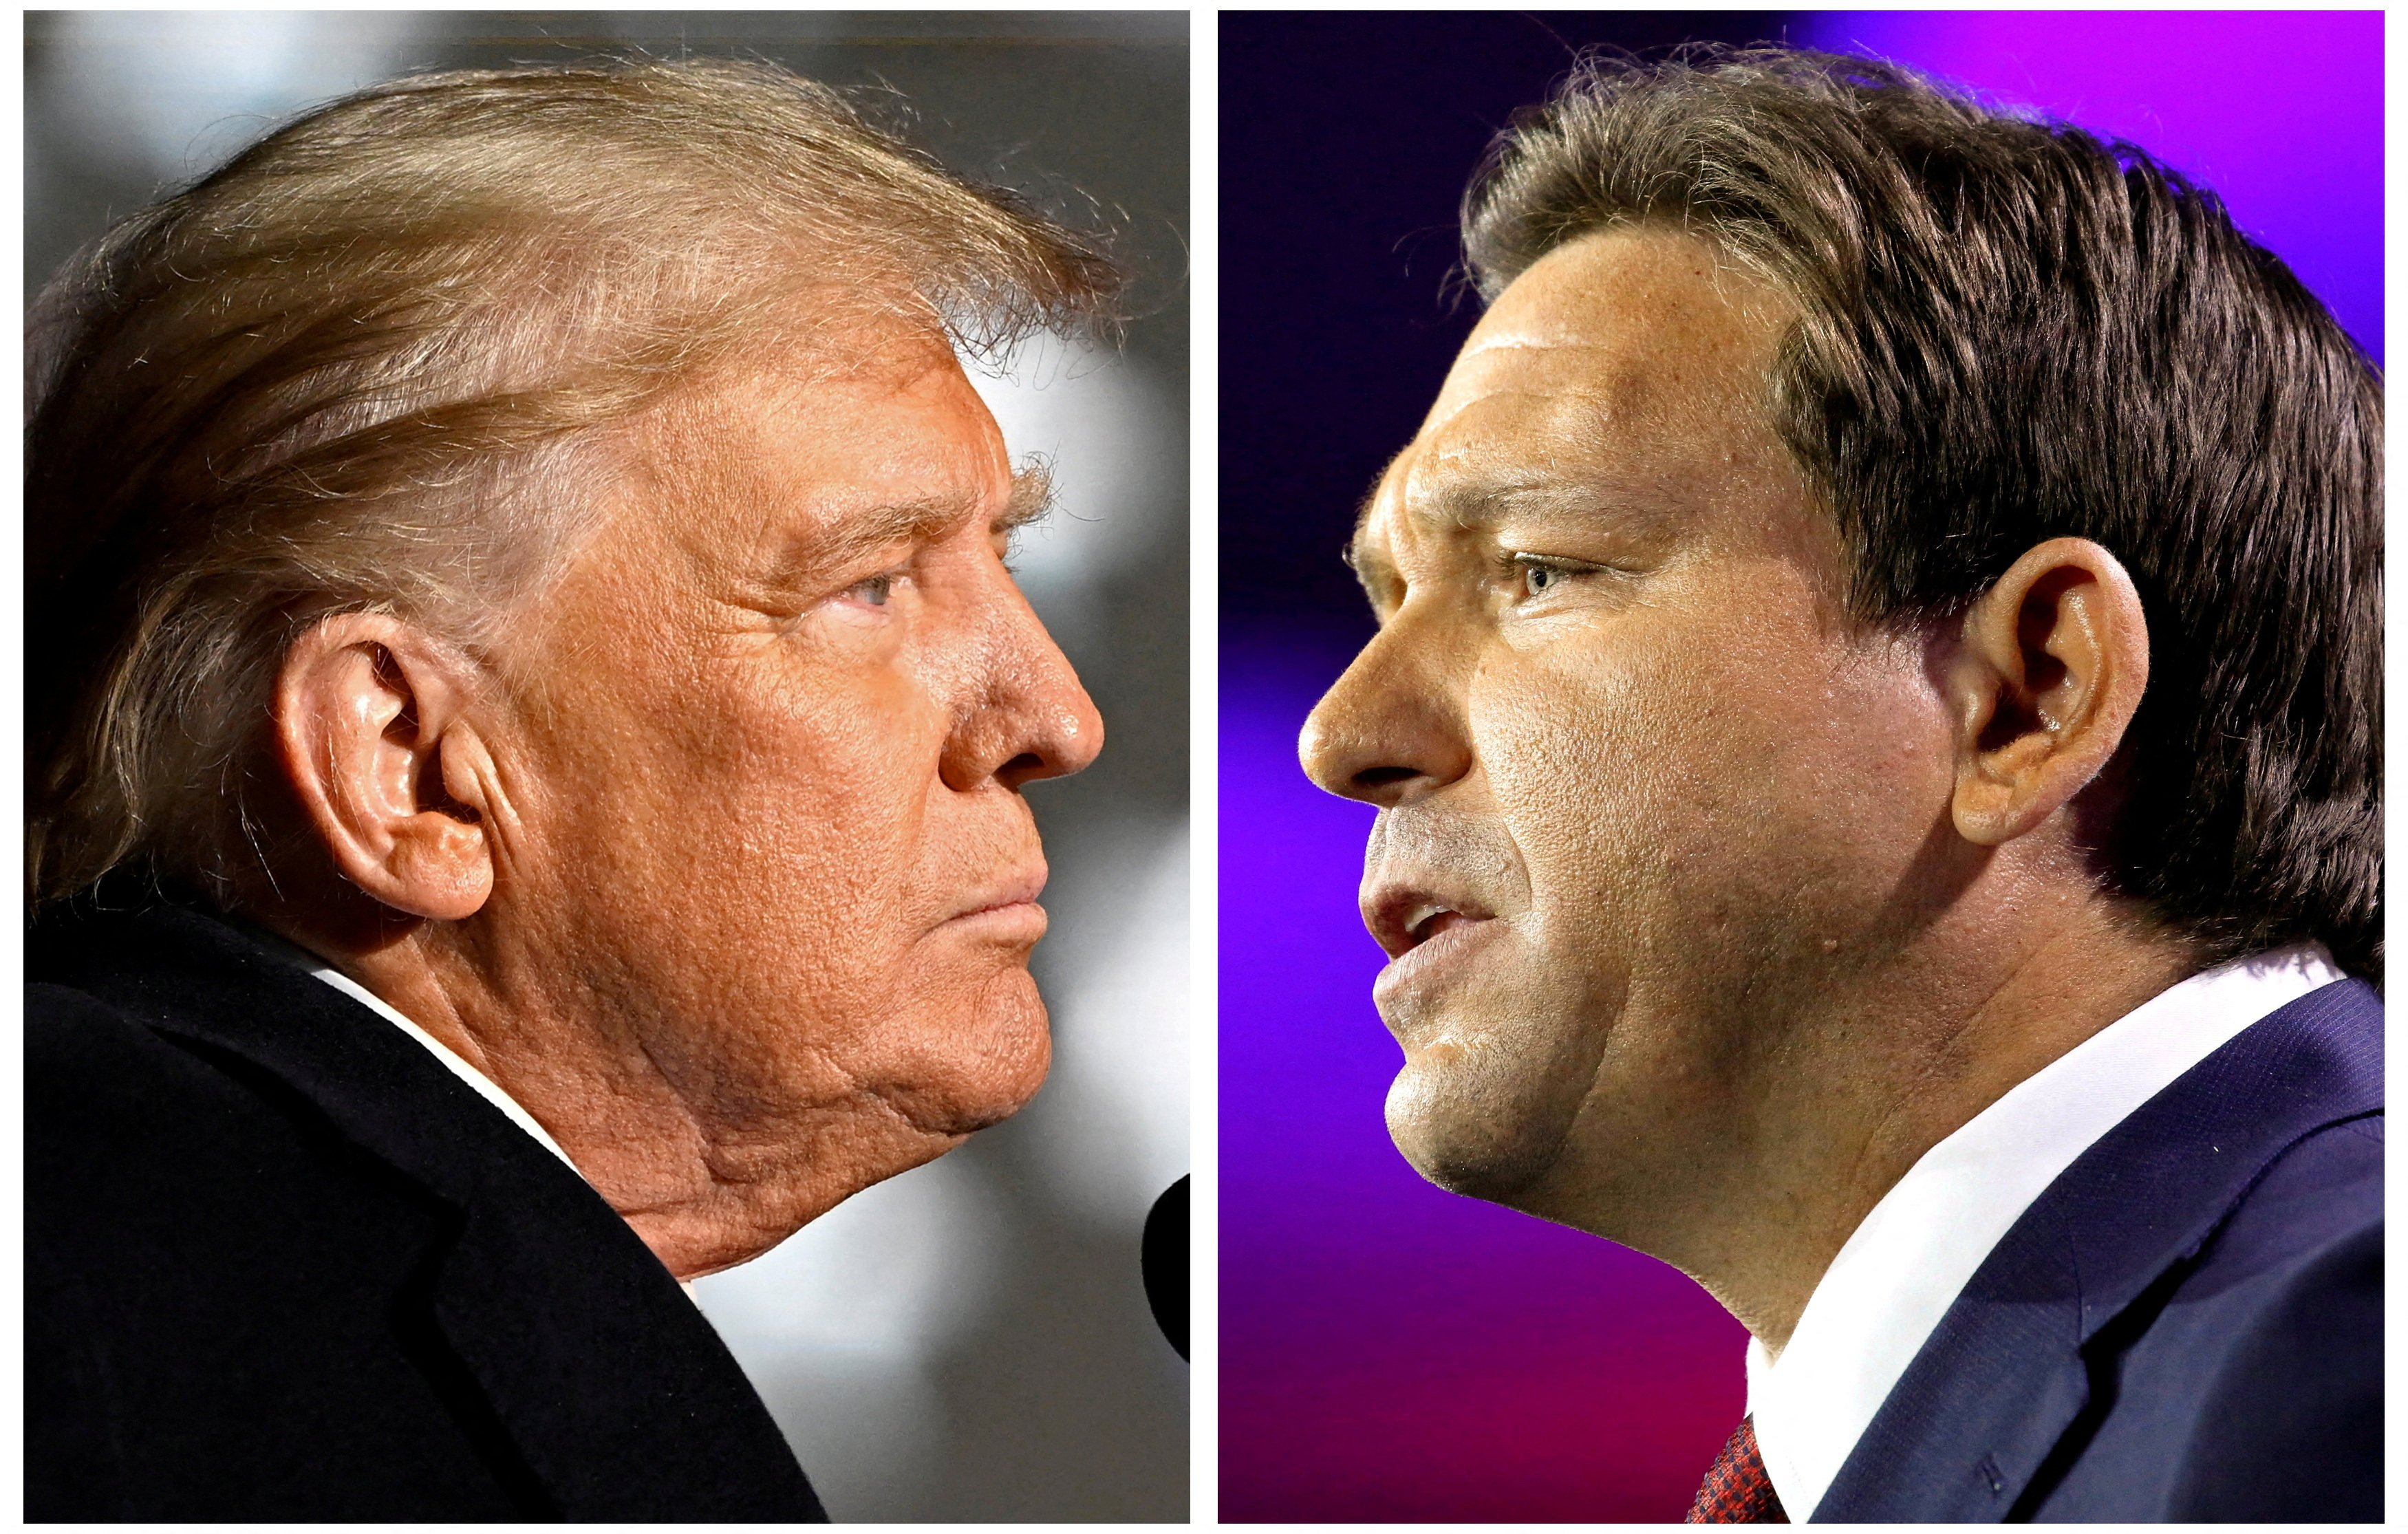 Ron DeSantis is expected to announce his presidential bid, formally challenging Donald Trump for the Republican Party’s nomination. Photo: Reuters